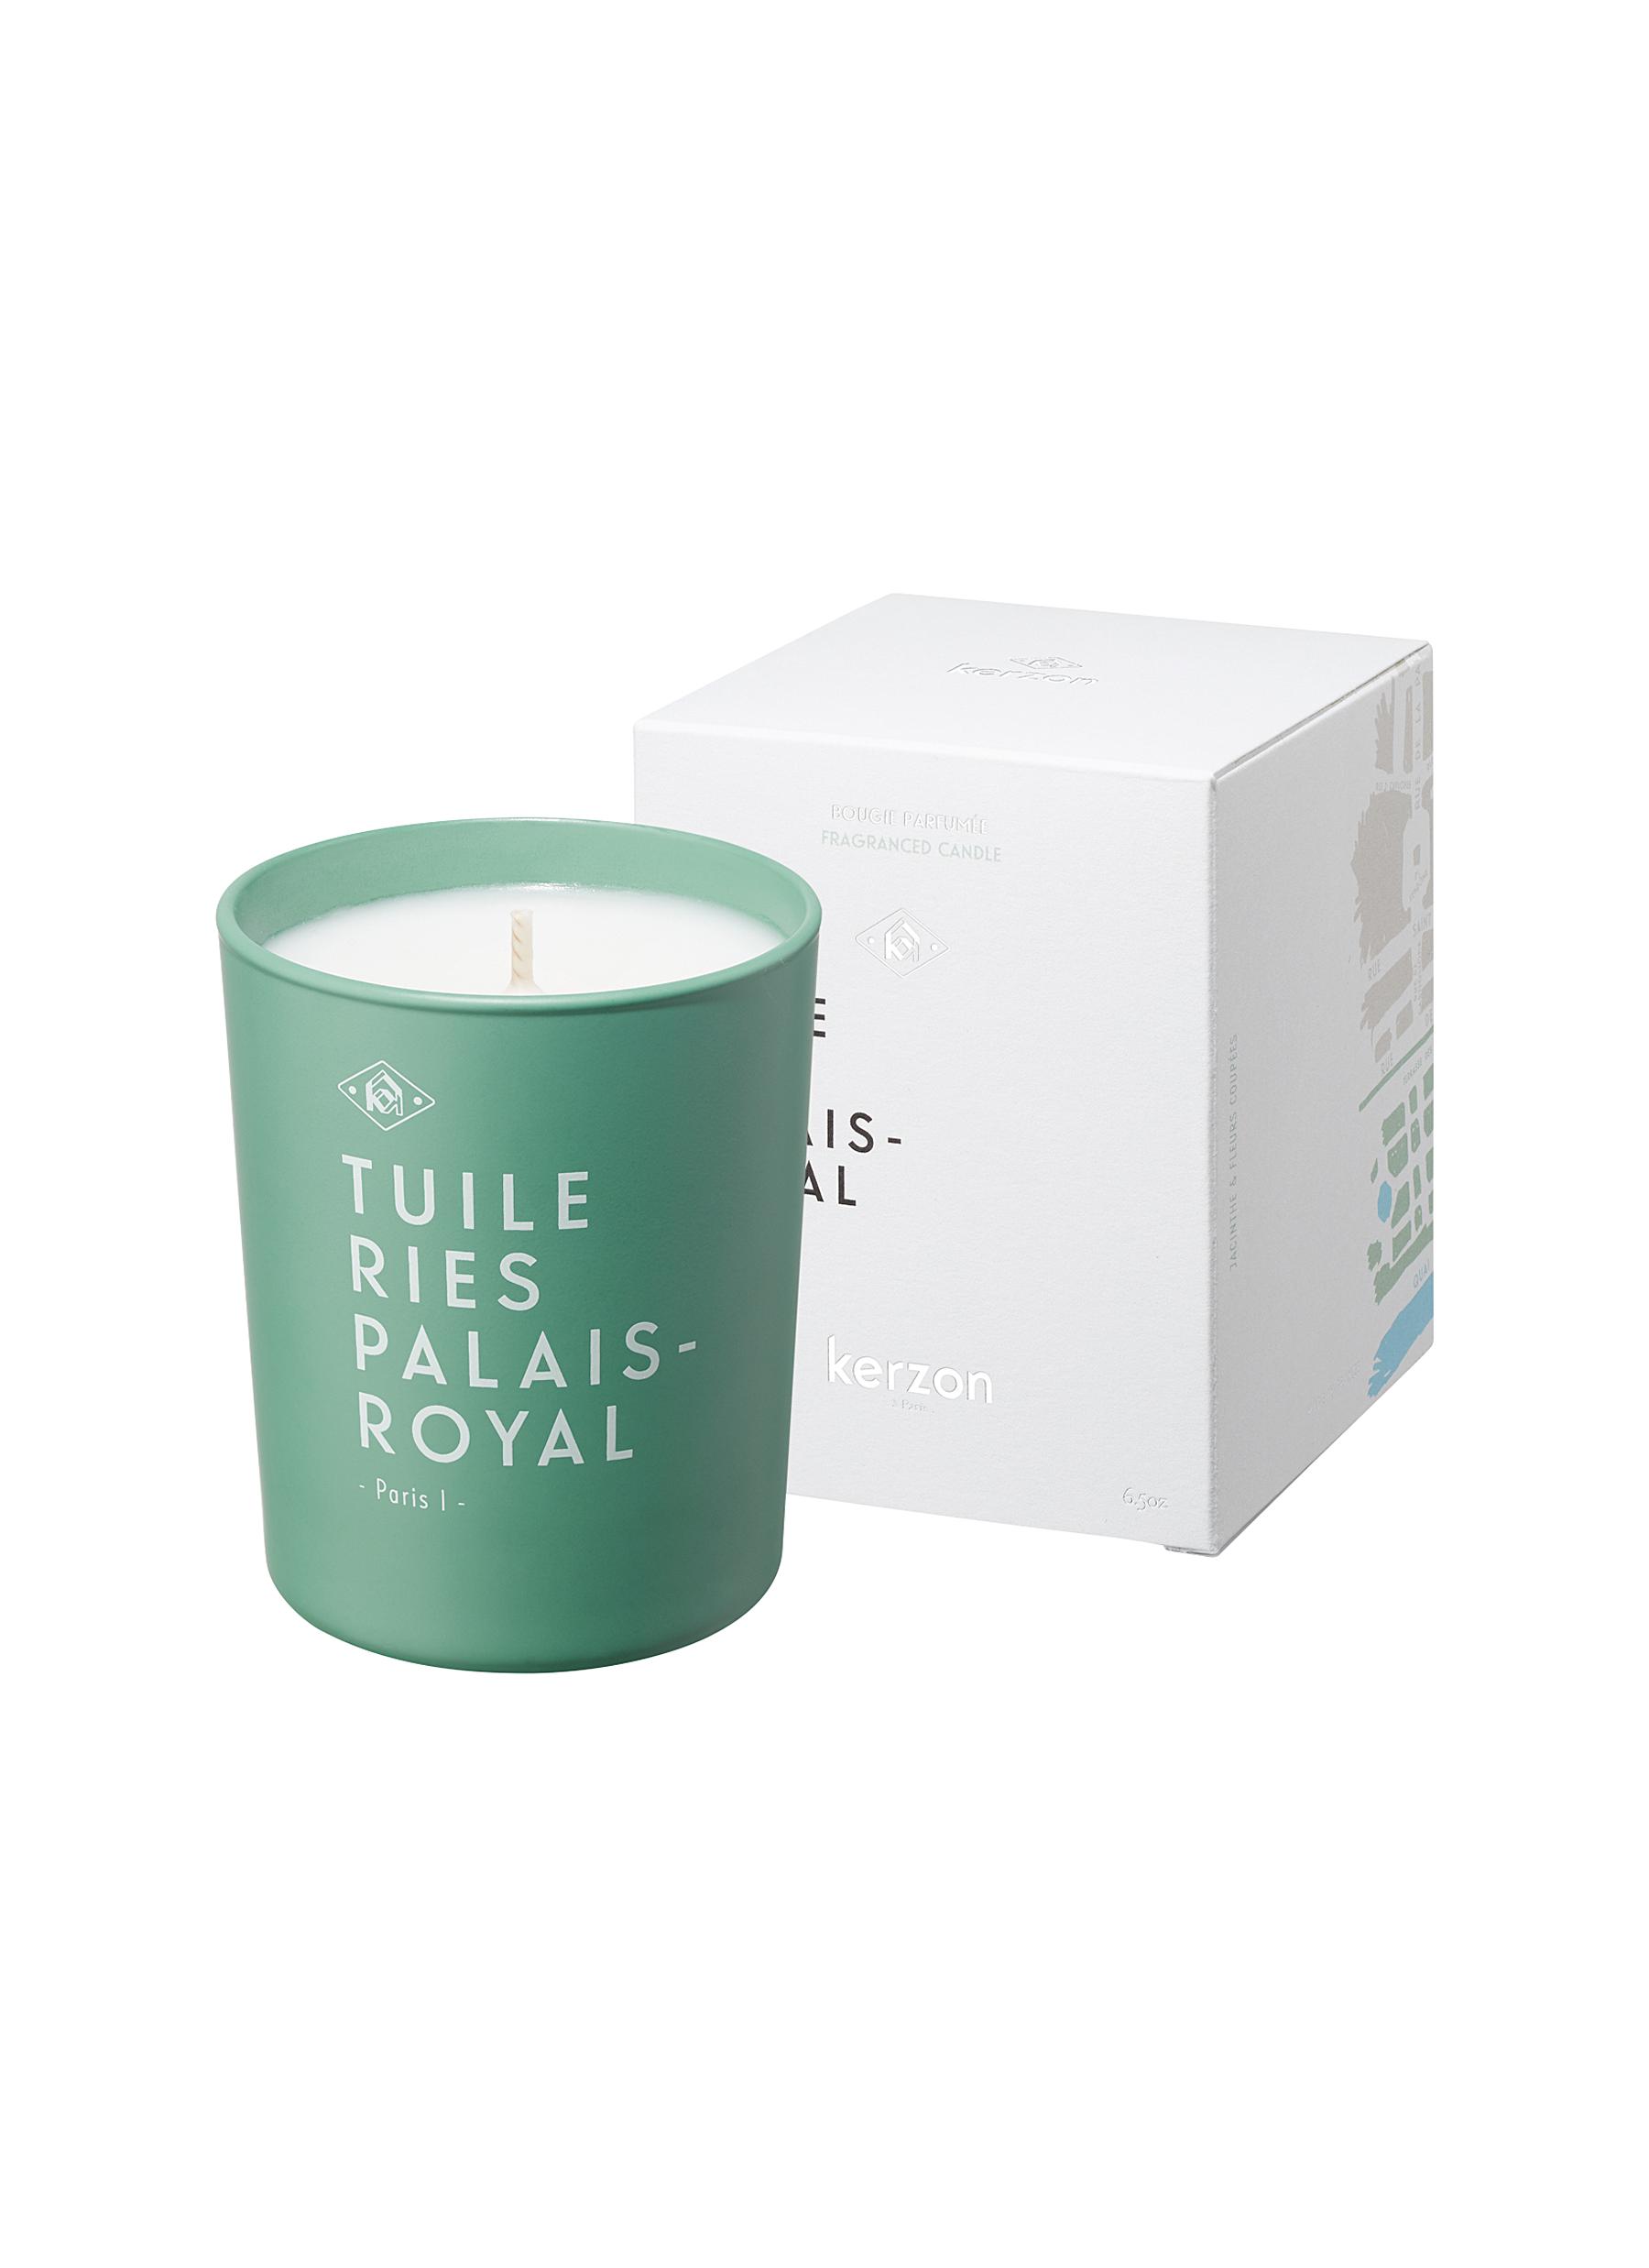 Tuileries Palais Royal Scented Candle 184g